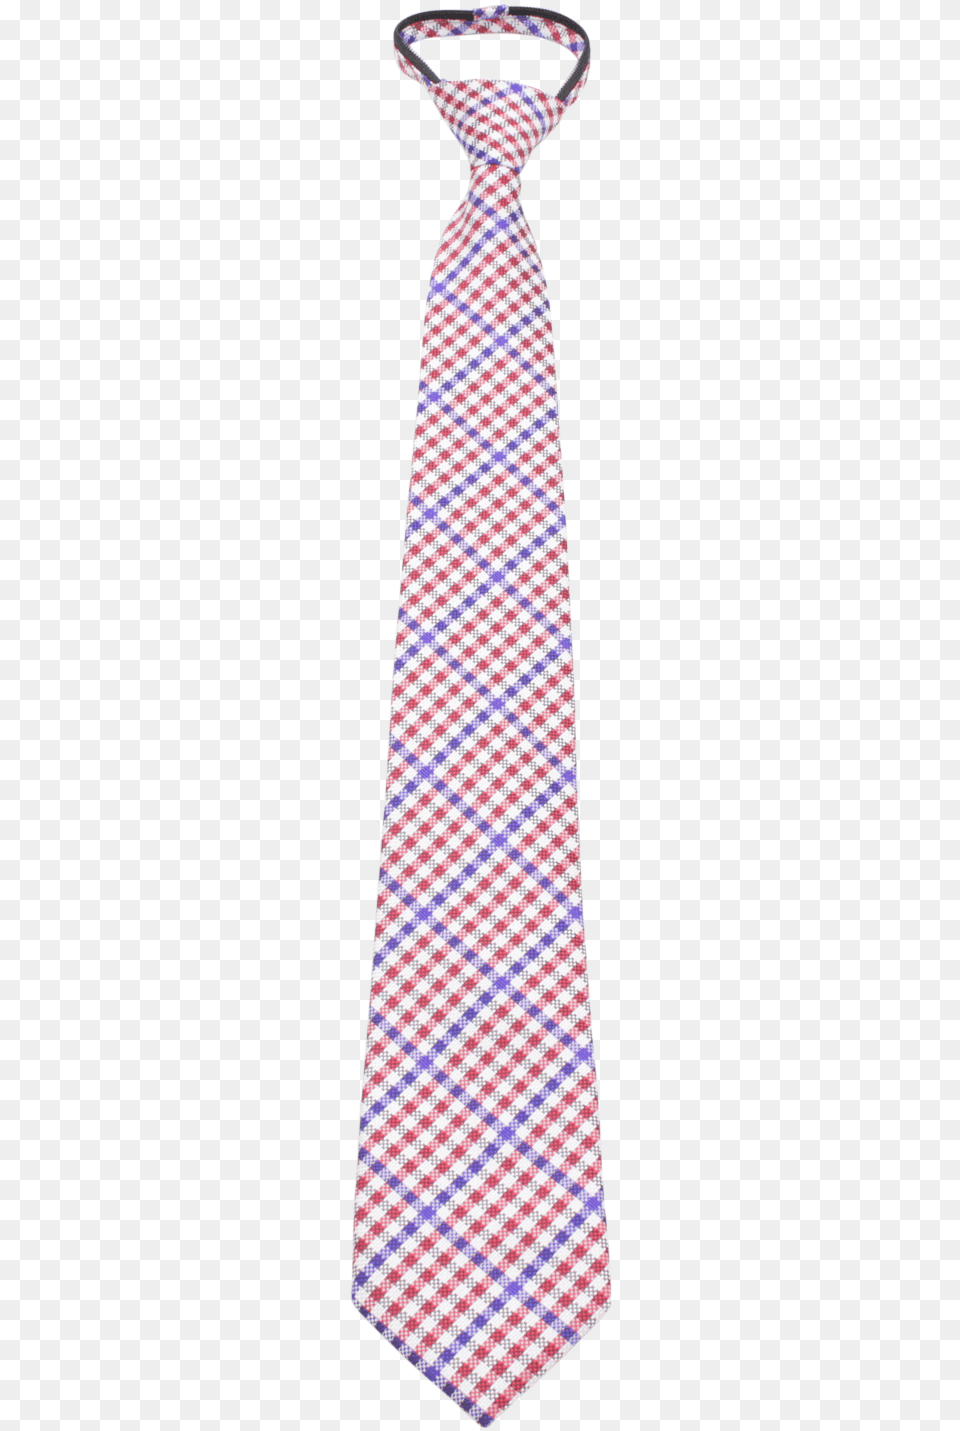 Red White And Blue Gingham Patterned Zipper Tie Blue, Accessories, Formal Wear, Necktie Png Image